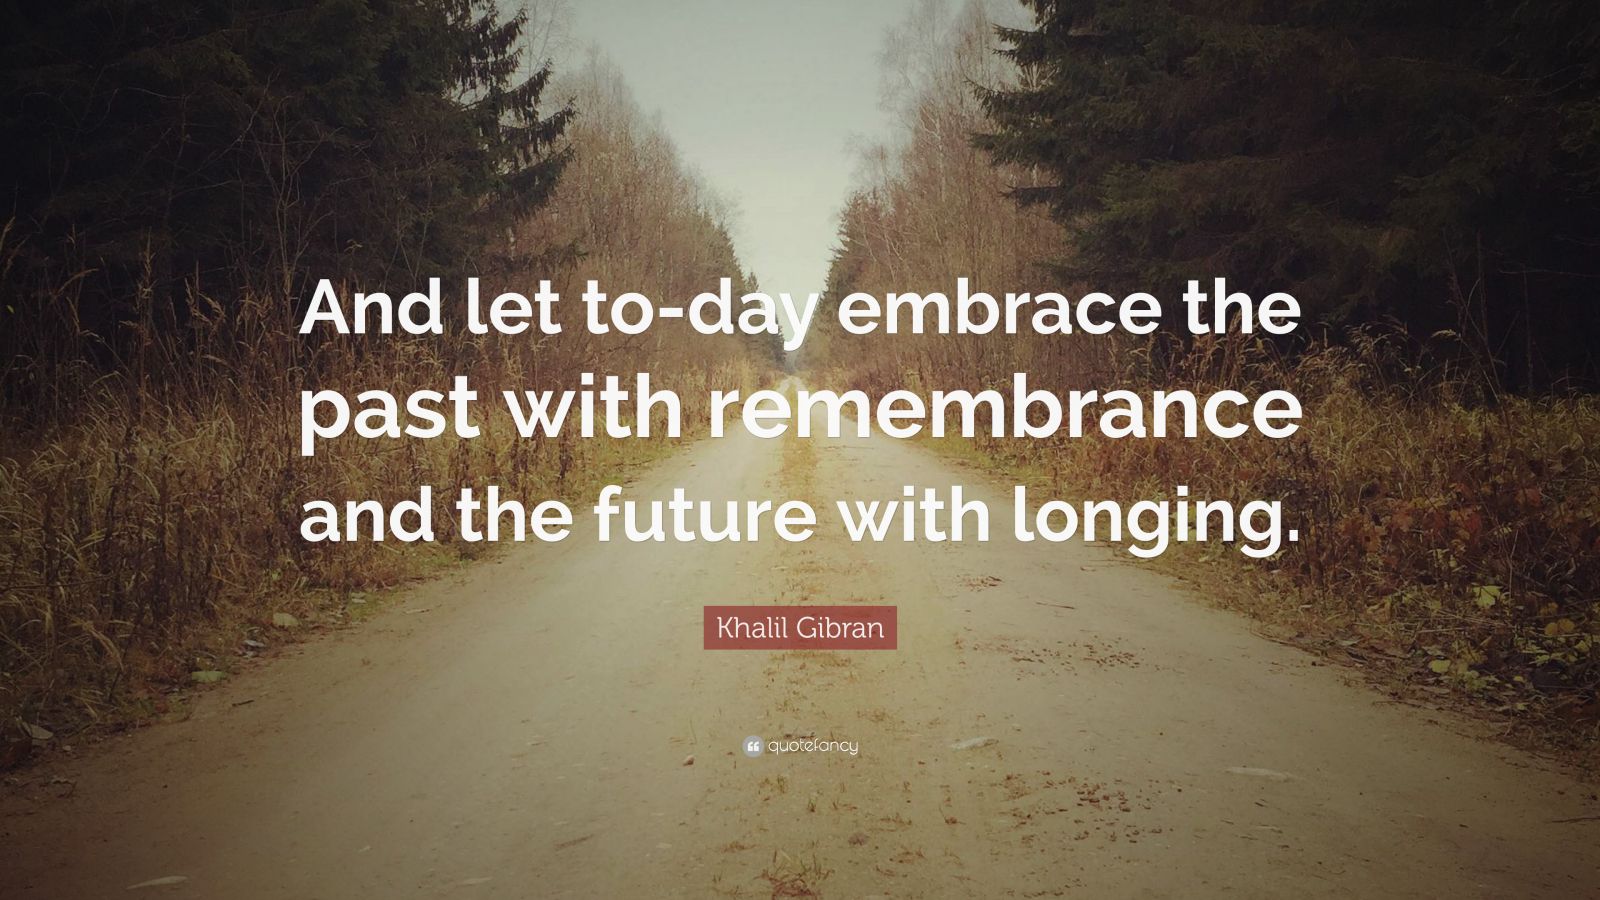 Khalil Gibran Quote: “And let to-day embrace the past with remembrance